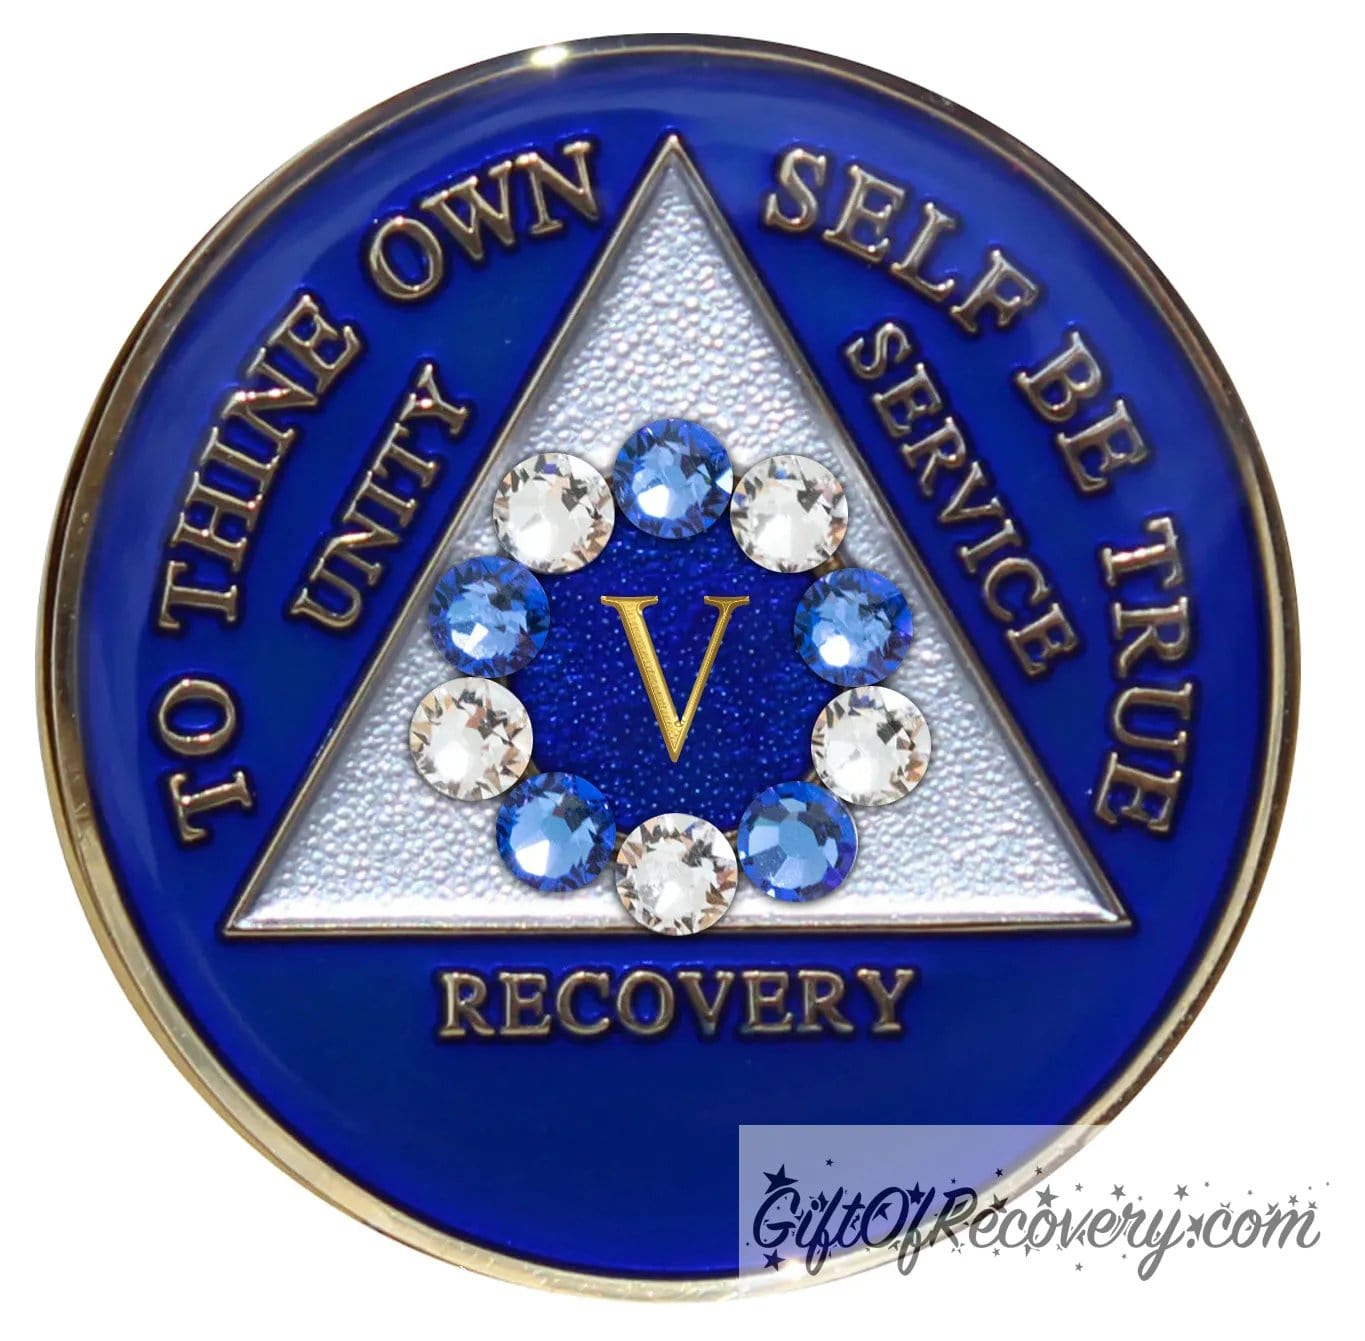 5 Year Big Book Blue AA medallion with 5 blue genuine crystals and 5 clear genuine crystal, making a circle around the 5 year, the recovery medallion has raised lettering to thine own self be true, and the outer rim of the medallion in 14k gold, inside the triangle is white and blue, emphasizing action and reflection.